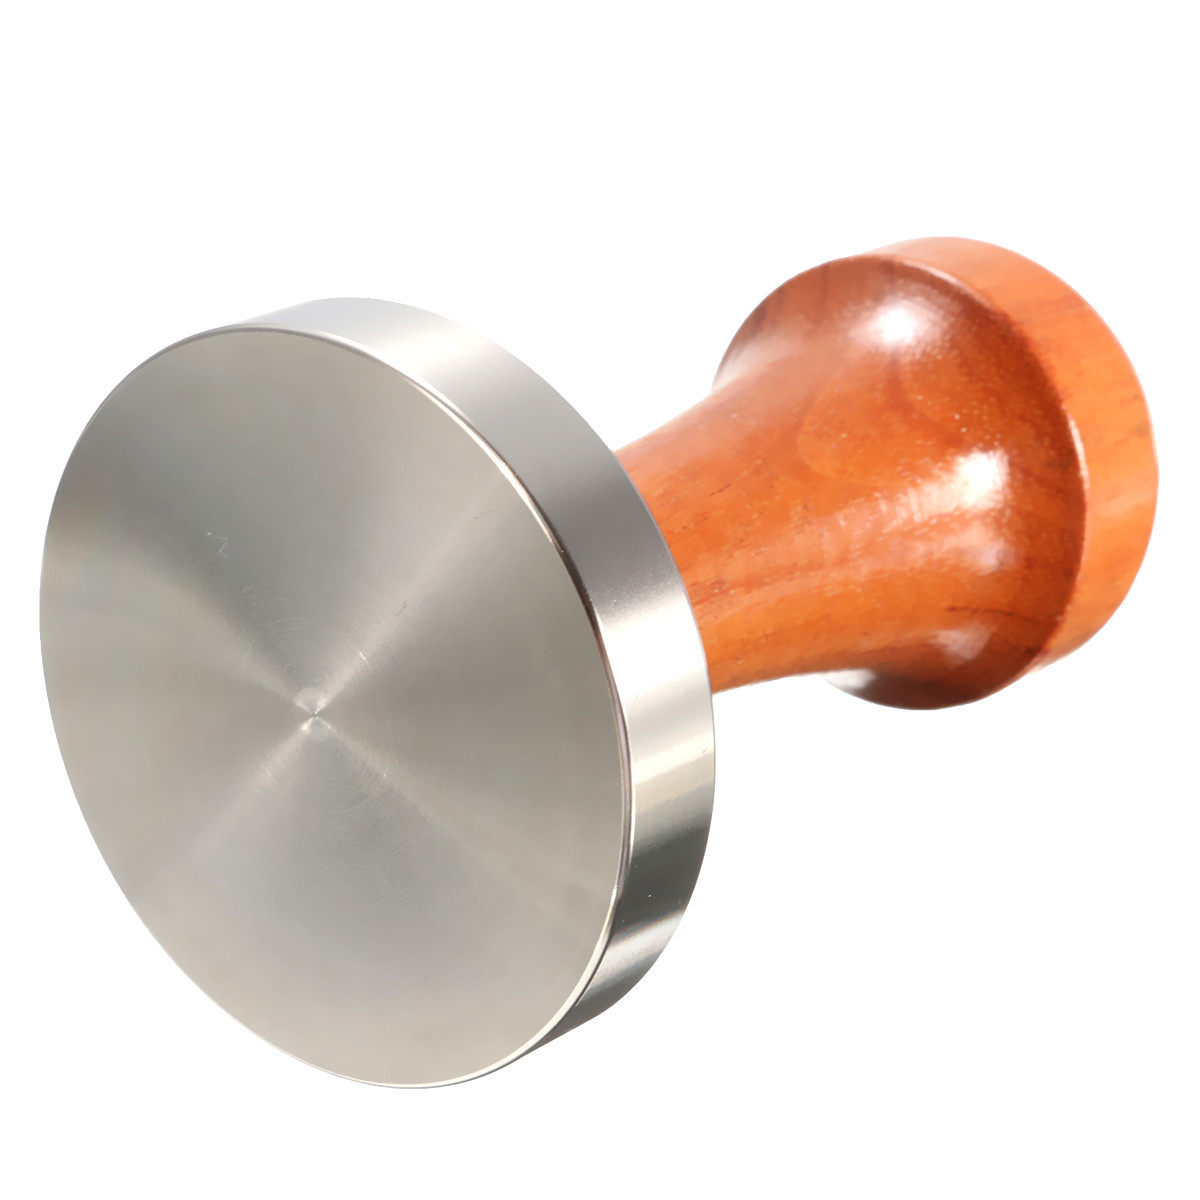 53mm-Stainless-Steel-Cafe-Coffee-Tamper-Bean-Press-for-Espresso-Flat-Base-Wooden-Handle-1170307-1